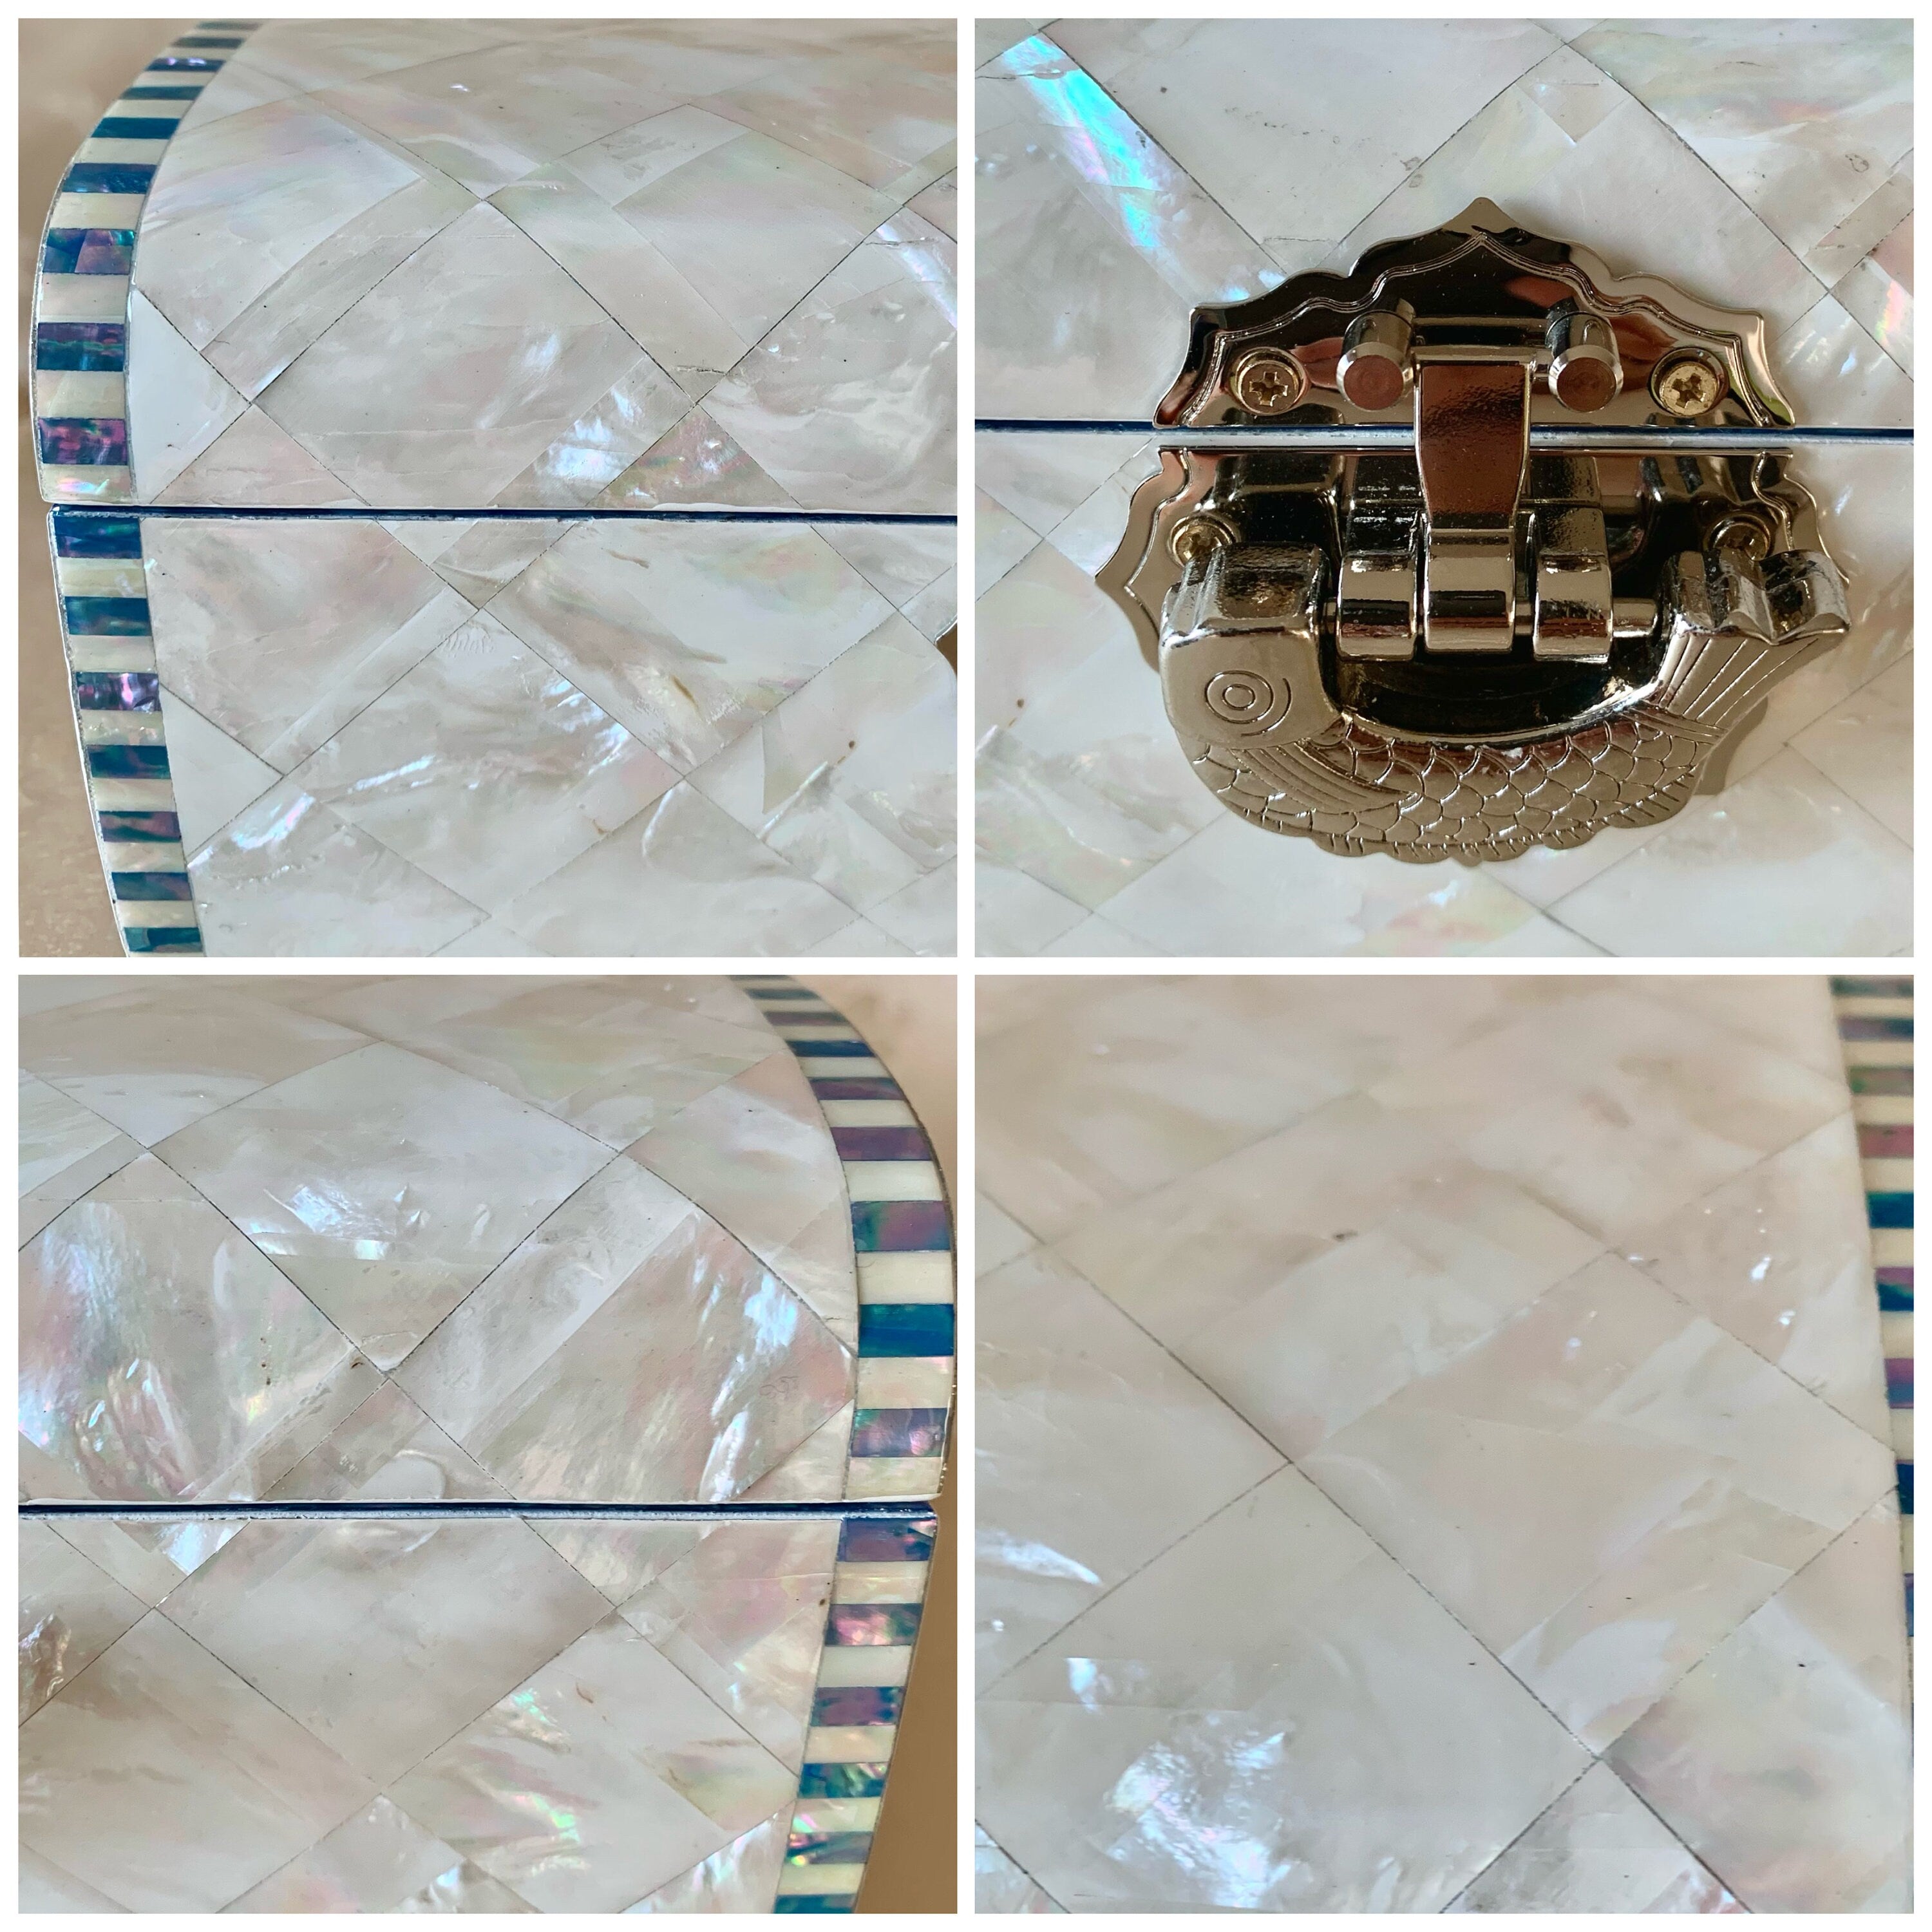 Close-up view of the checkered pattern on the white mother of pearl jewelry box.